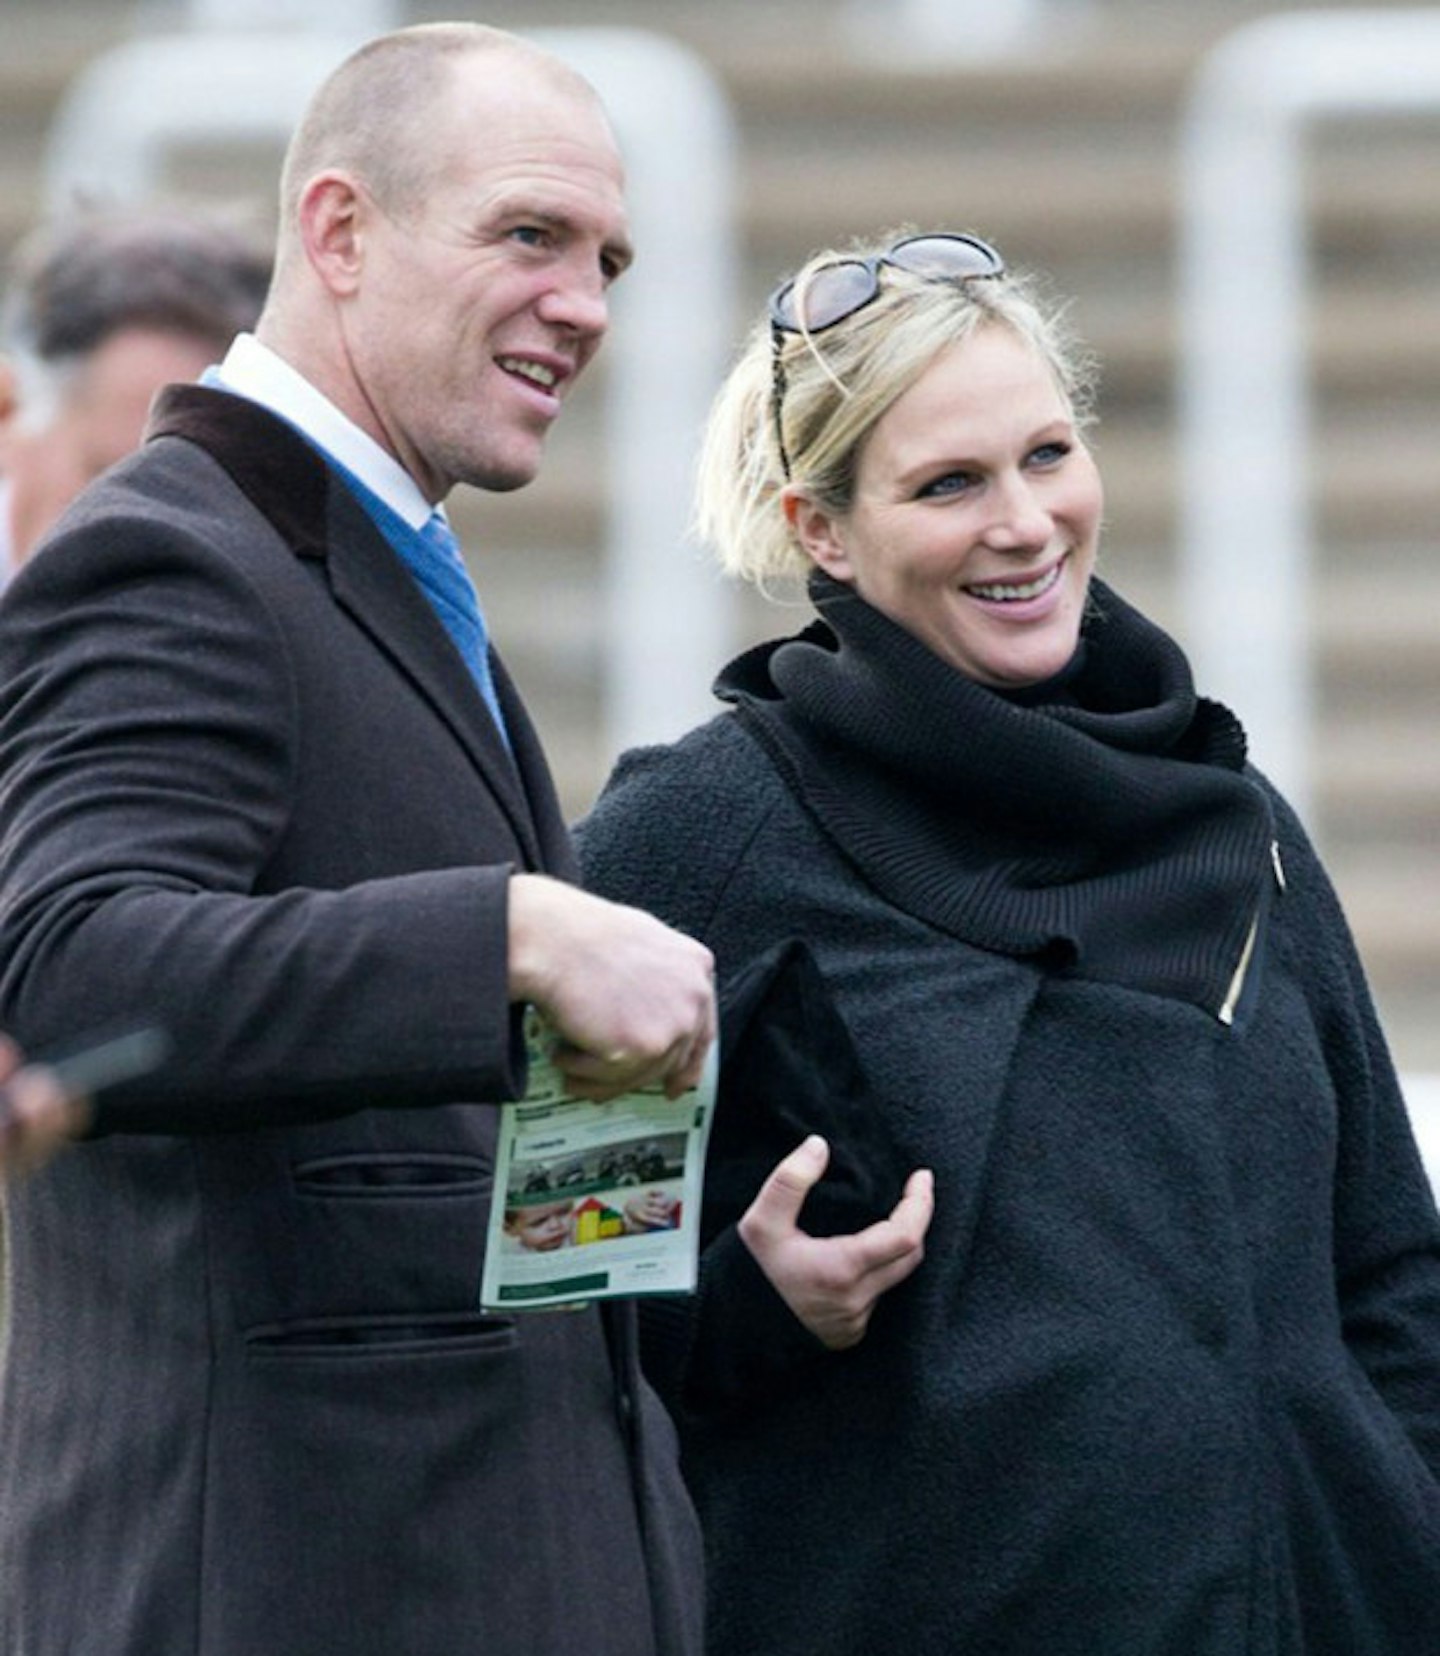 January 2014: Zara Phillips and Mike Tindall welcomed daughter Mia